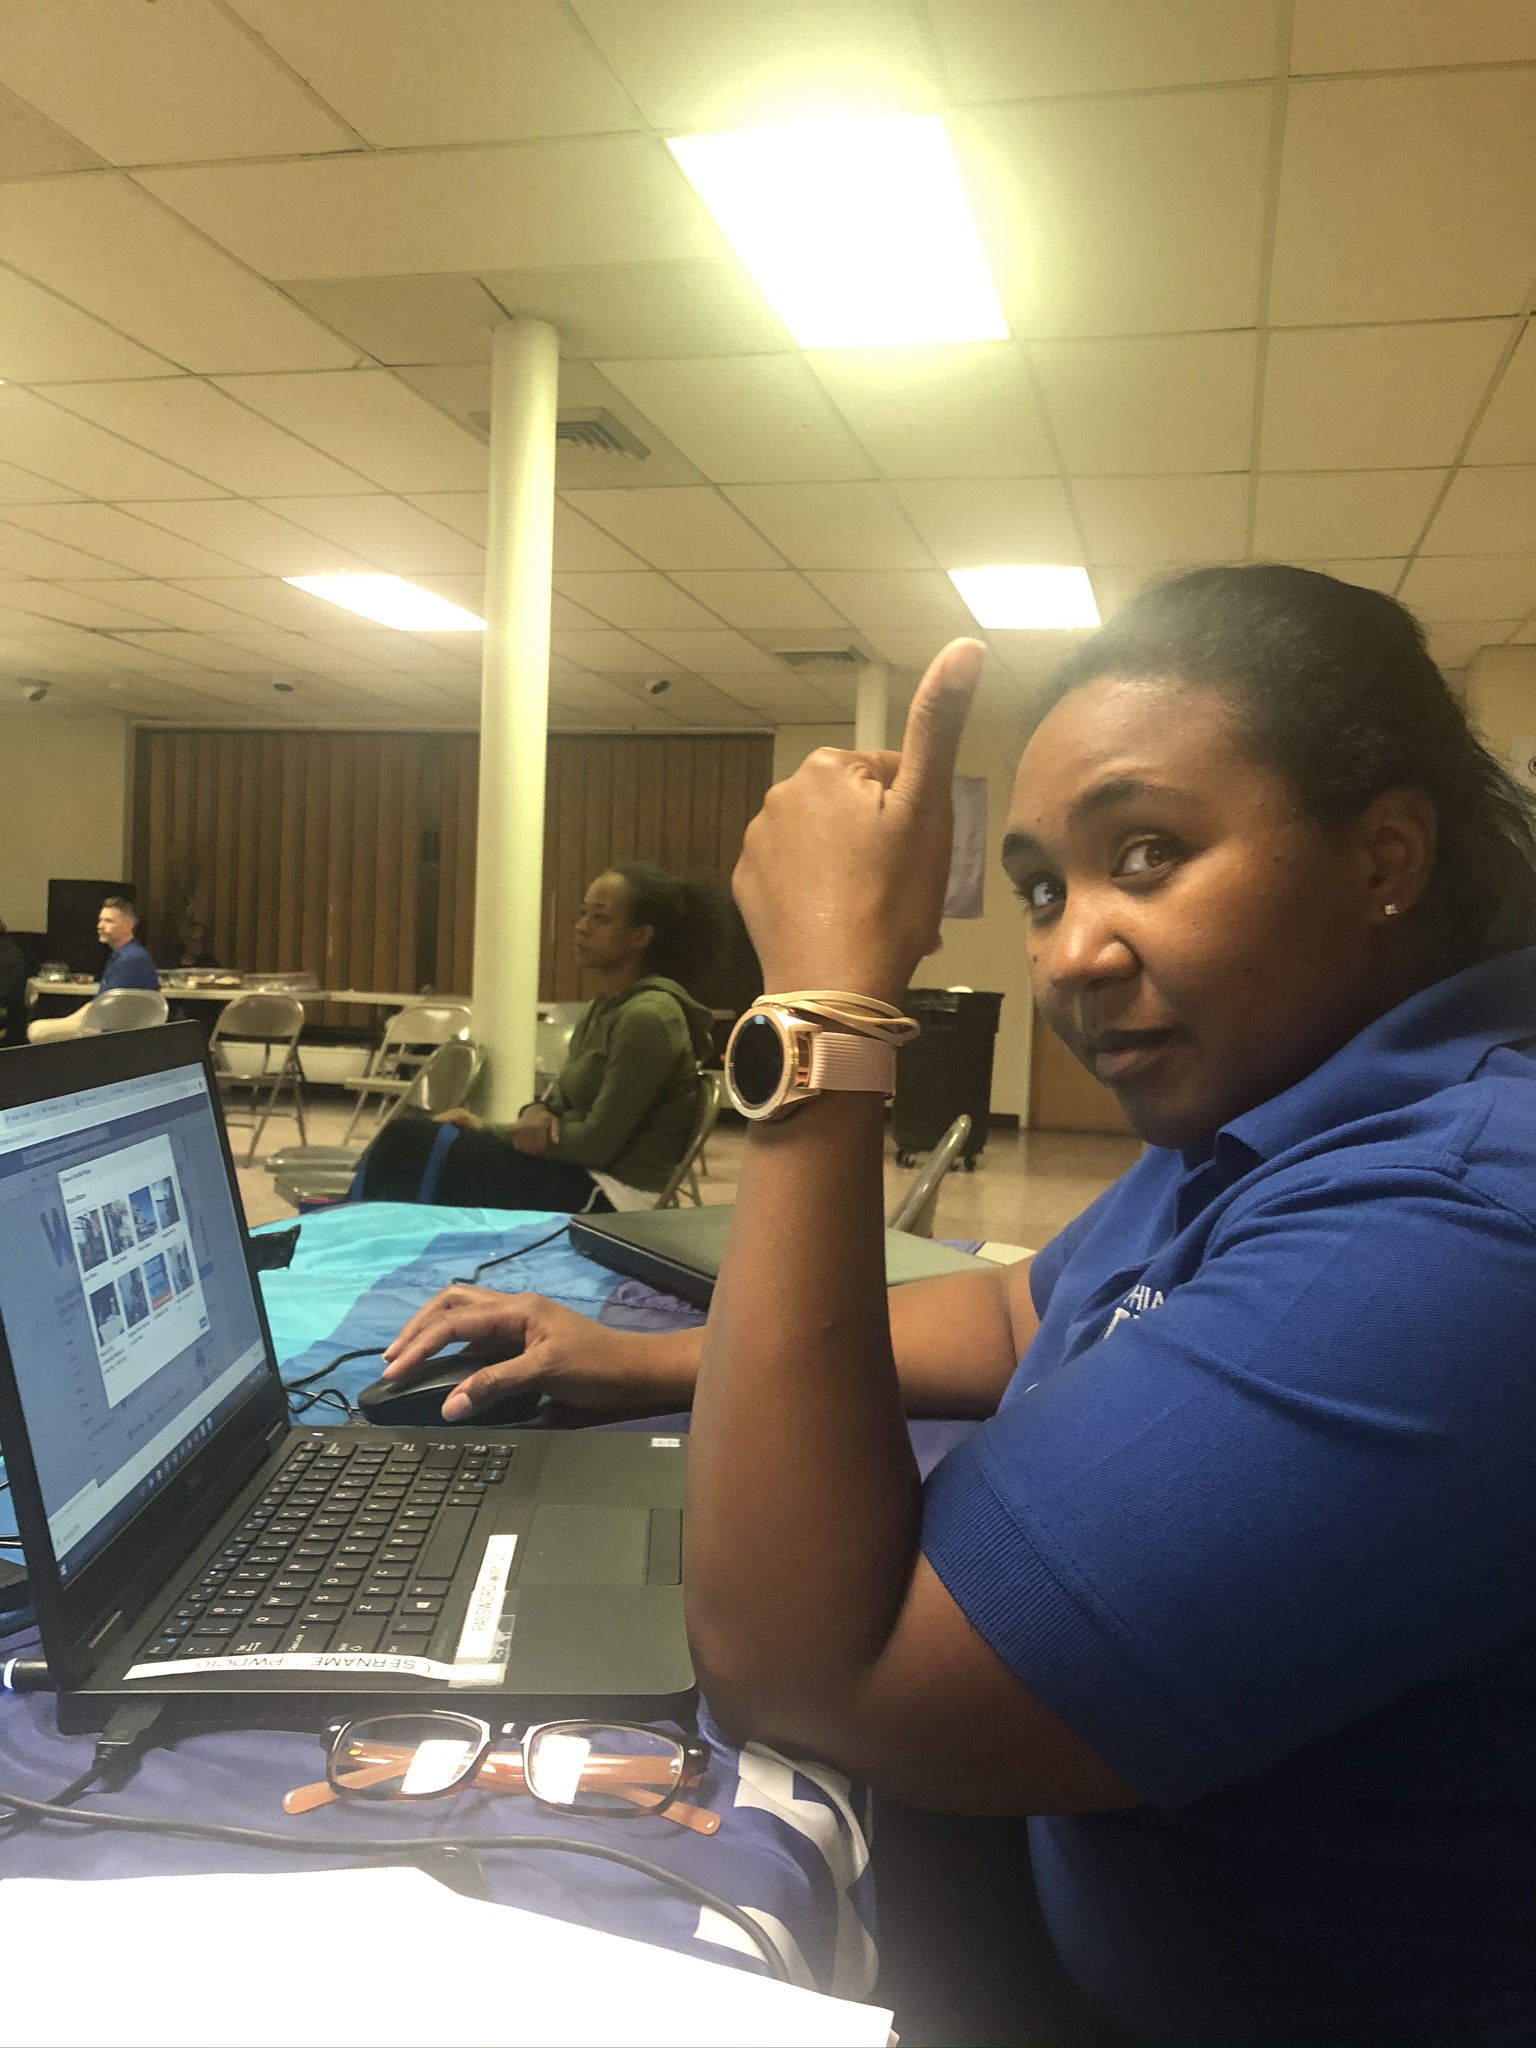 Online Customer Service Specialist Saterria Kersey pauses work on her laptop to give a thumbs-up